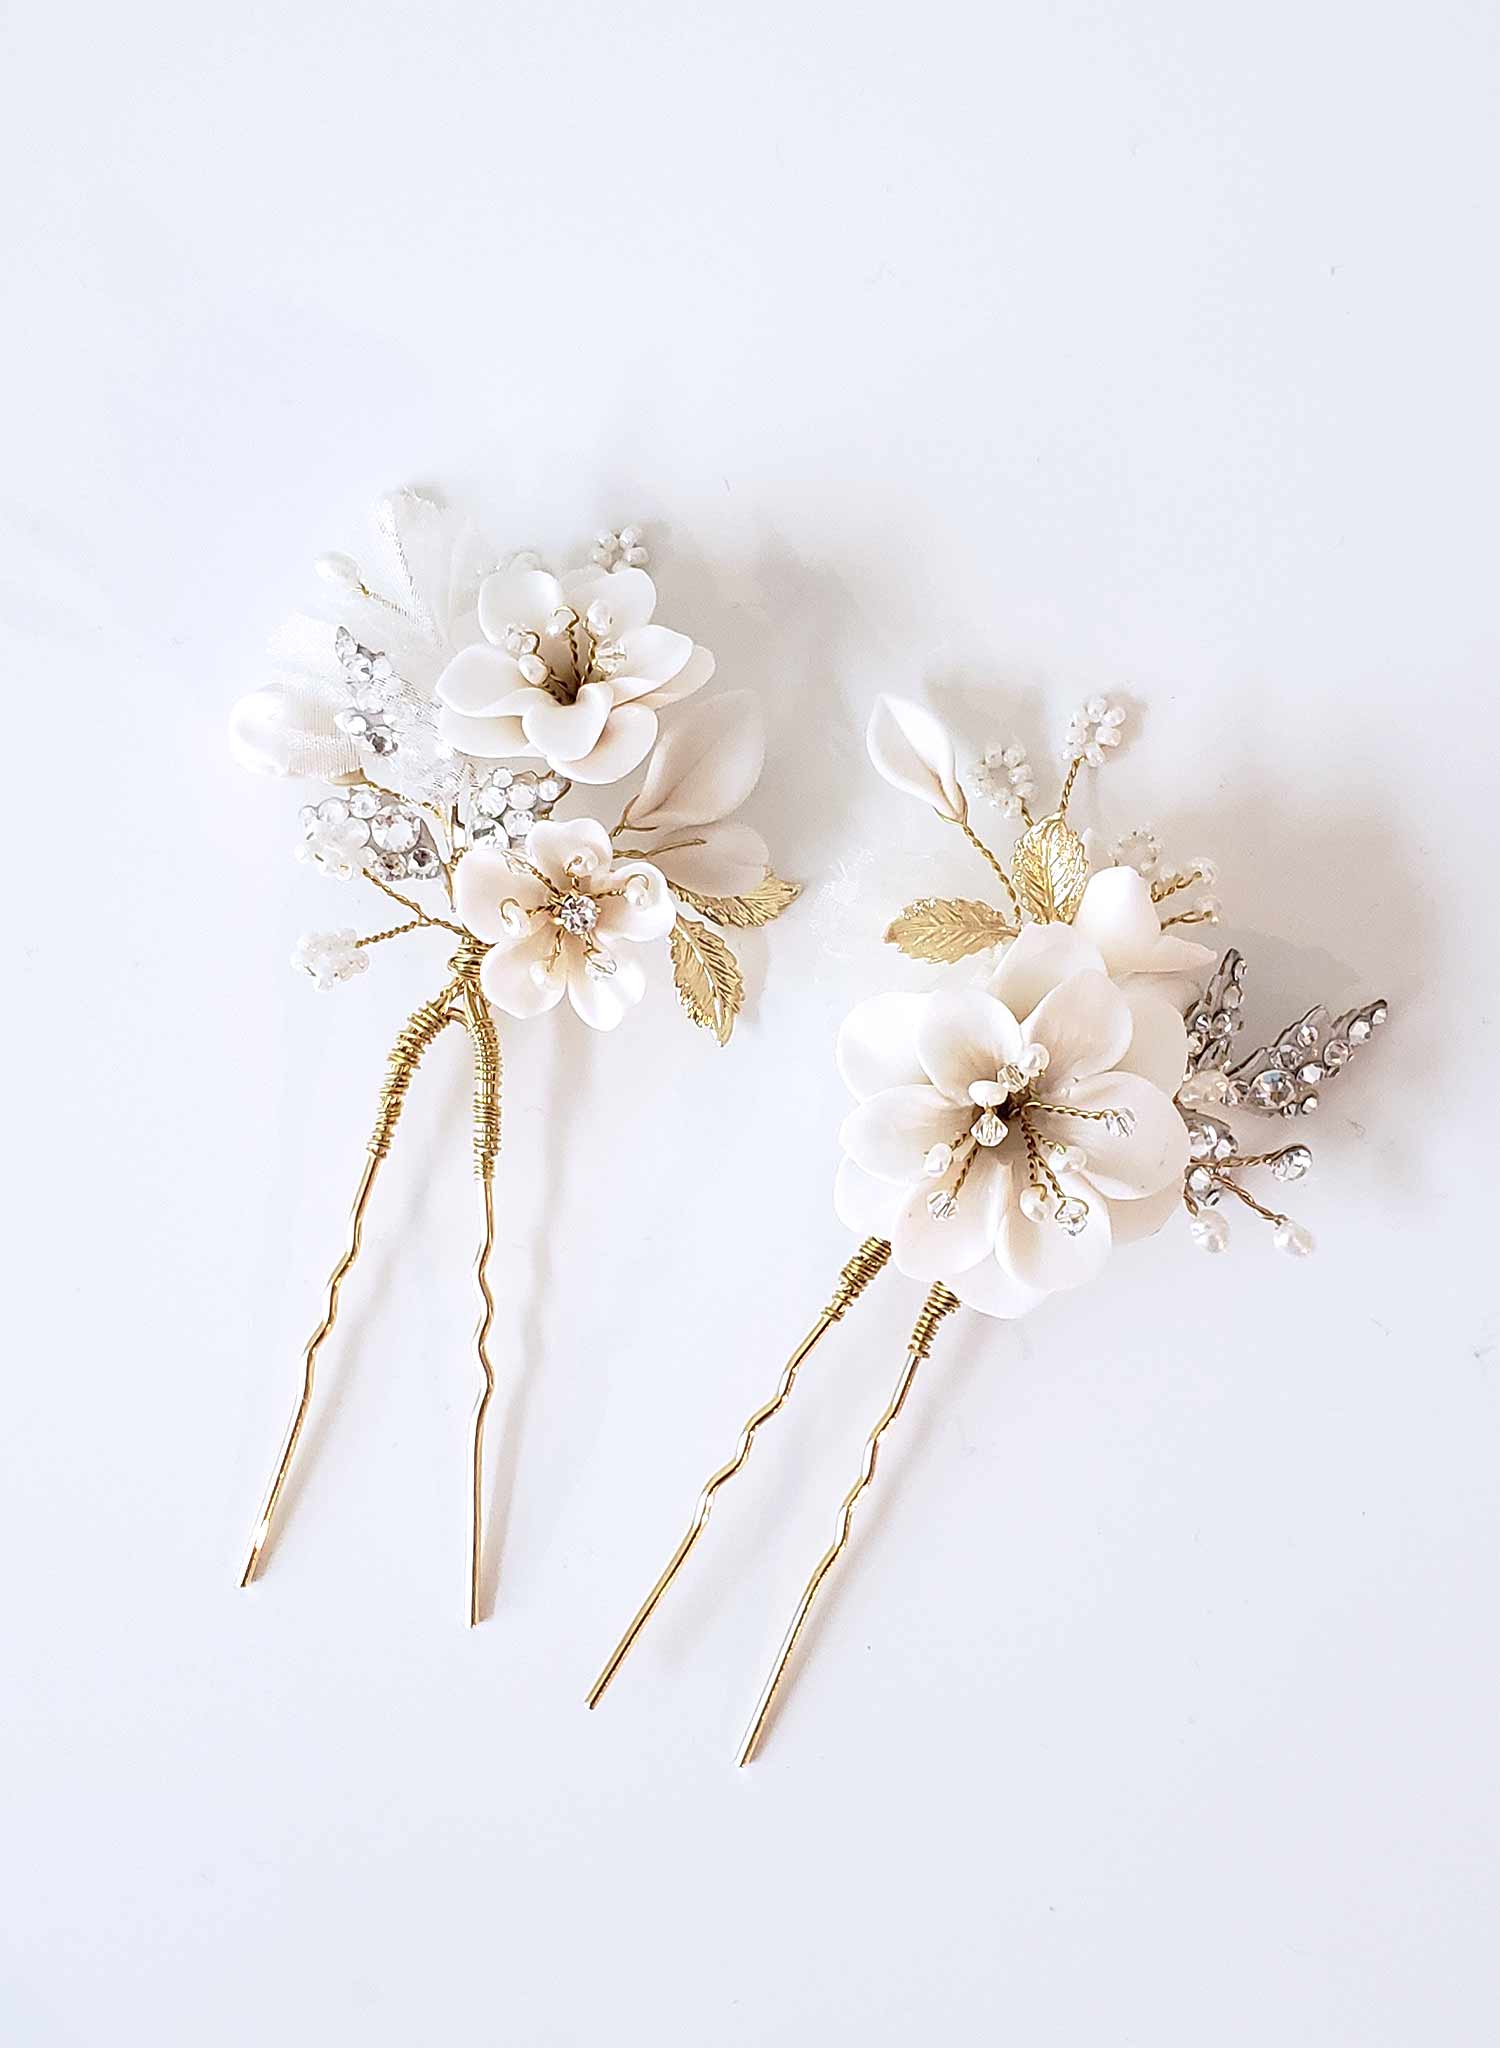 Twigs & Honey Floral Bridal Hair Pins, Florelle - Creamy Blossom Hair Pin Set of 2 - Style #925